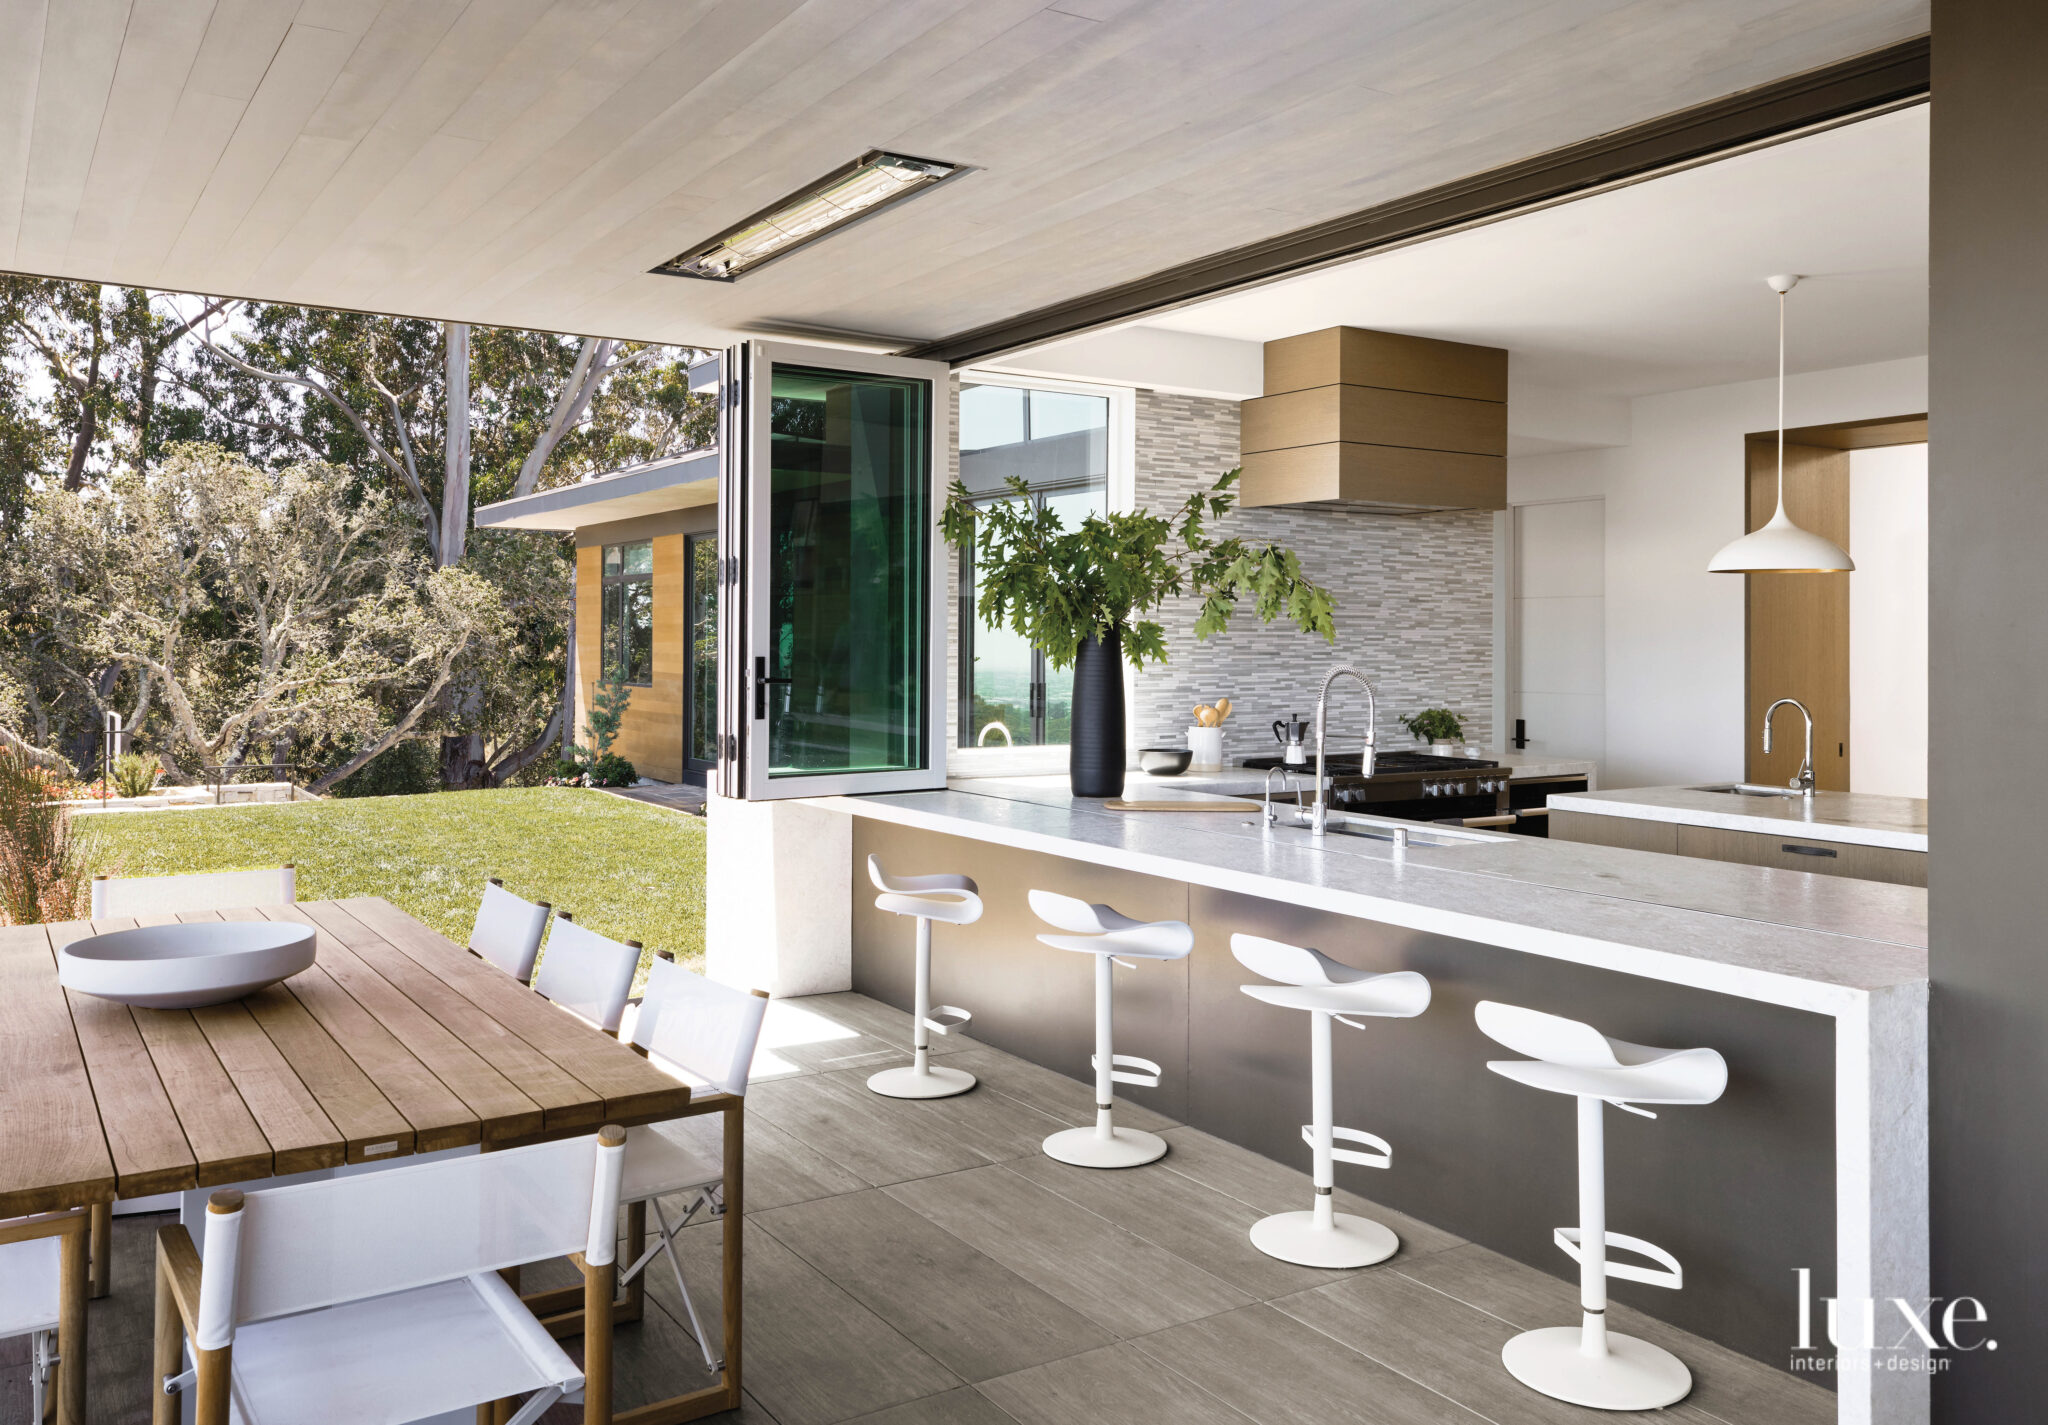 10 Kitchens That Will Make You Feel At One With The Outdoors - Luxe ...